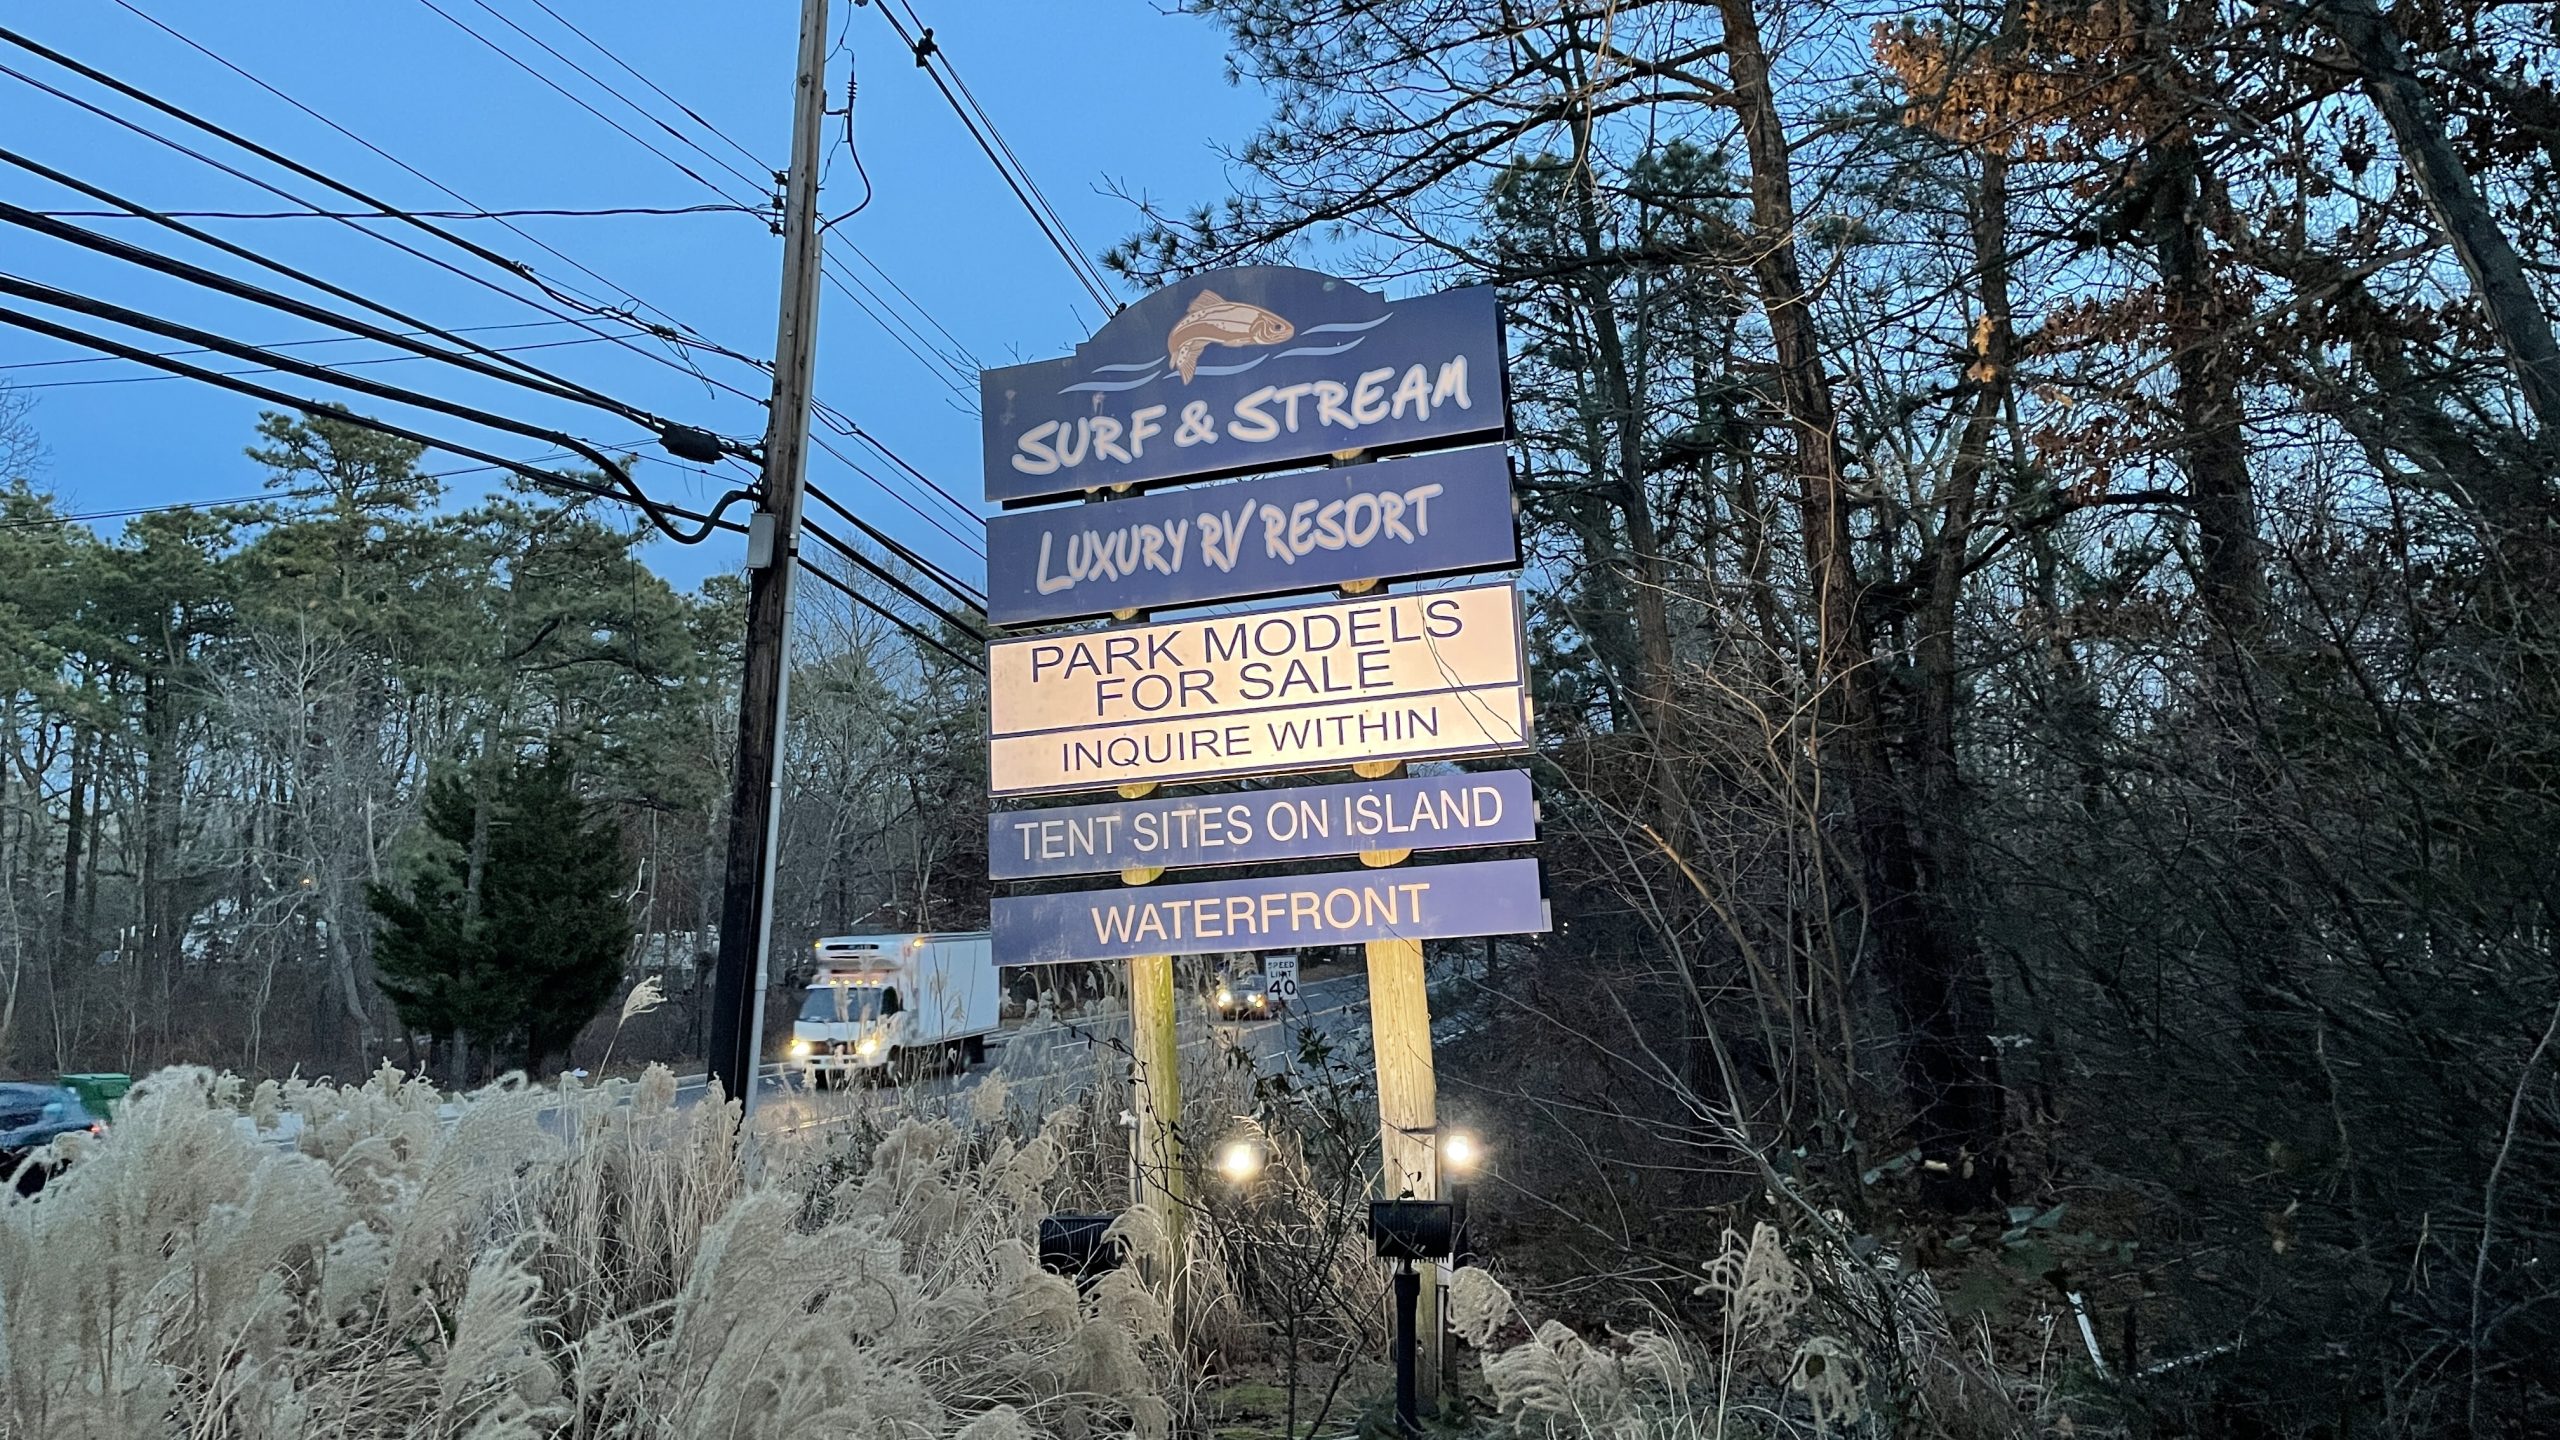 The Surf and Stream campground, Manchester, N.J., Jan. 13, 2022. (Photo: Daniel Nee)